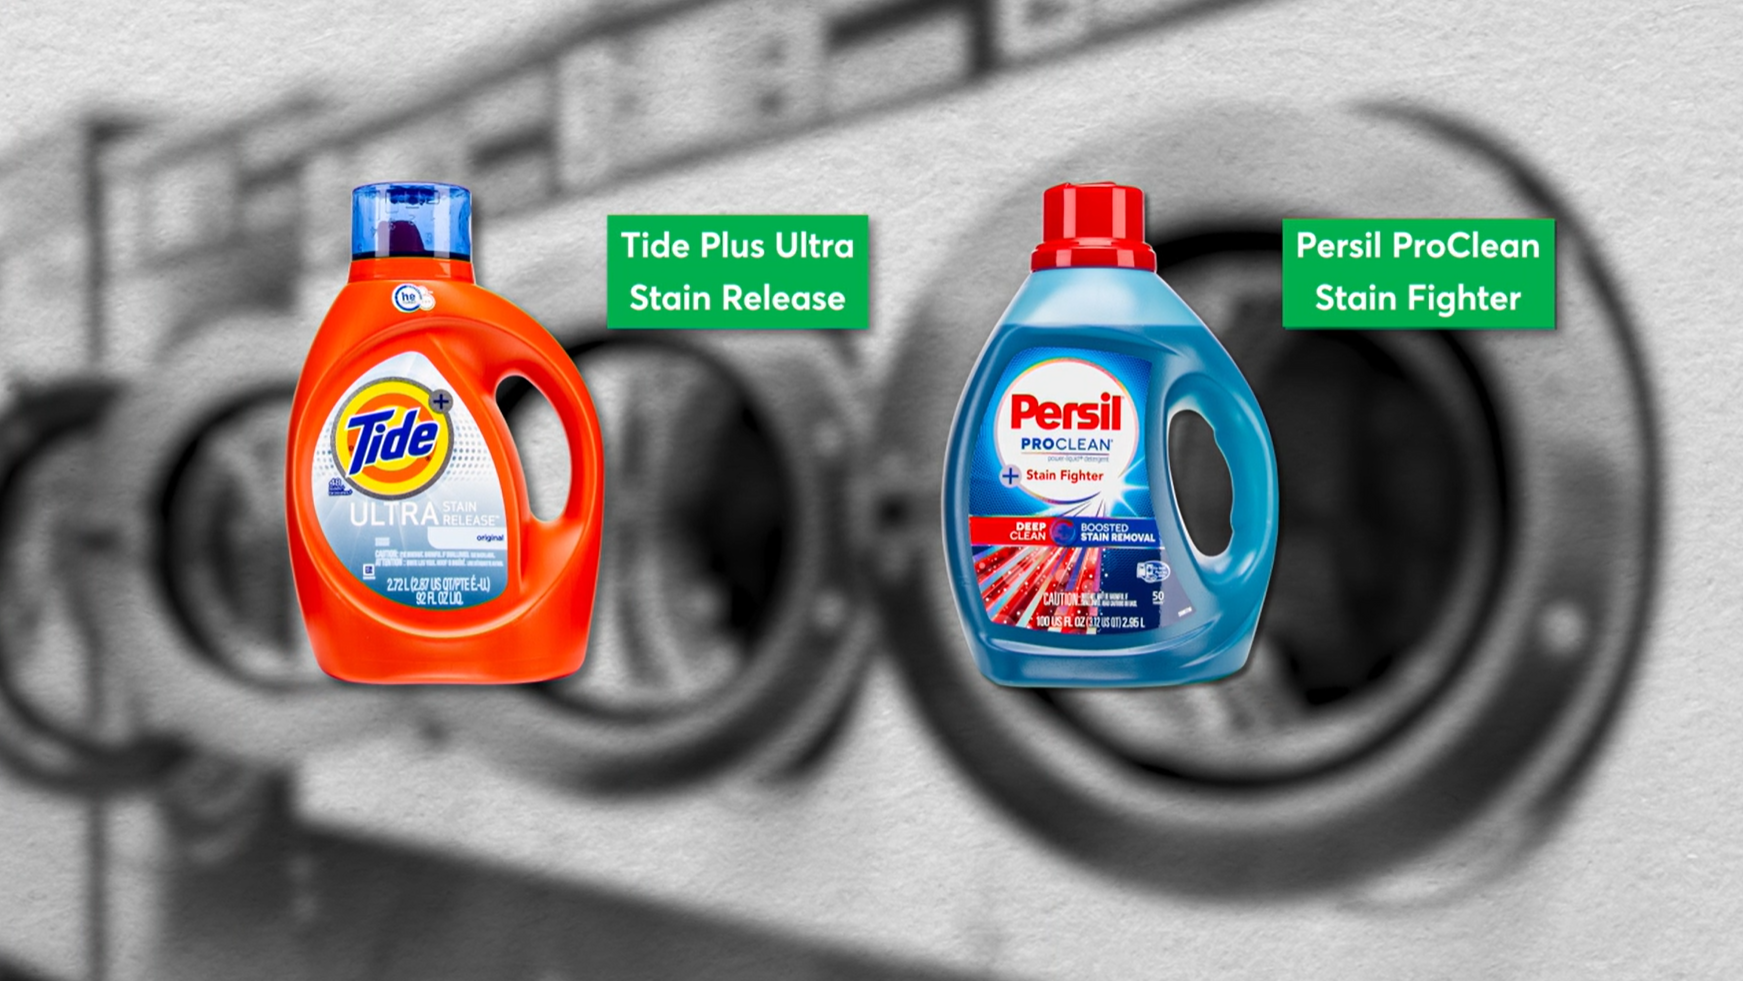 Tide and Persil laundry detergent